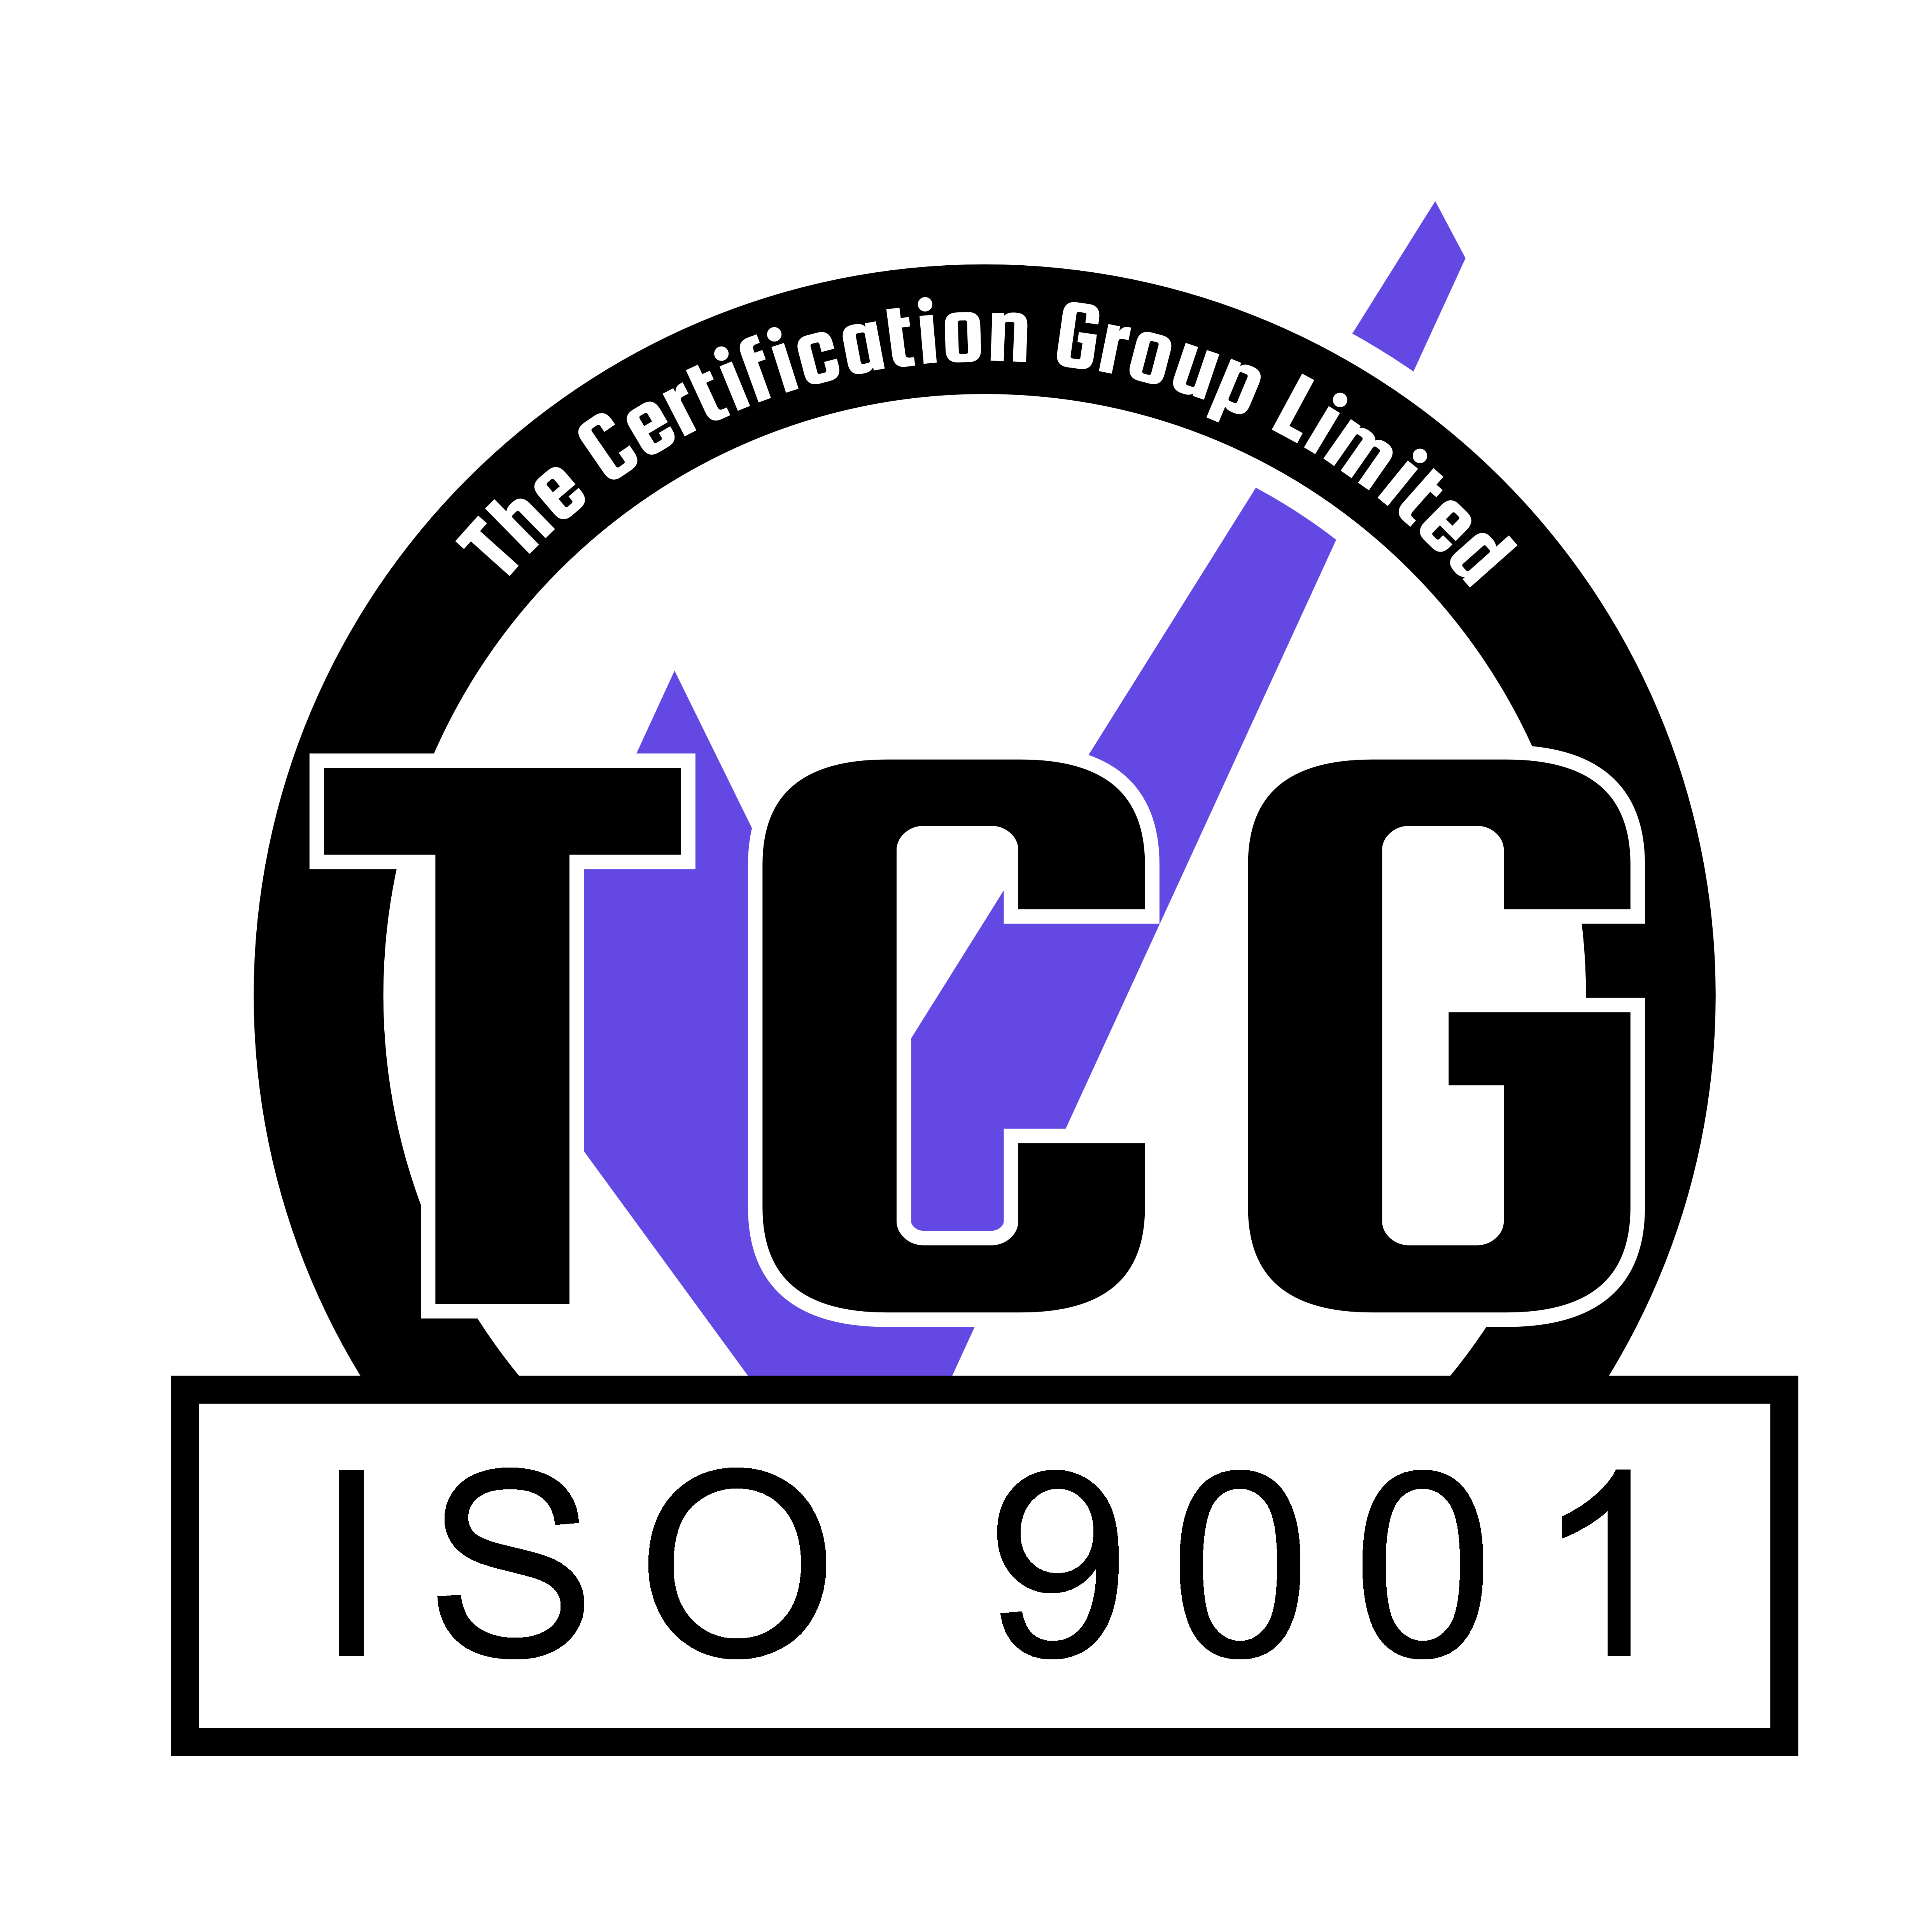 The Certification Group ISO 9001